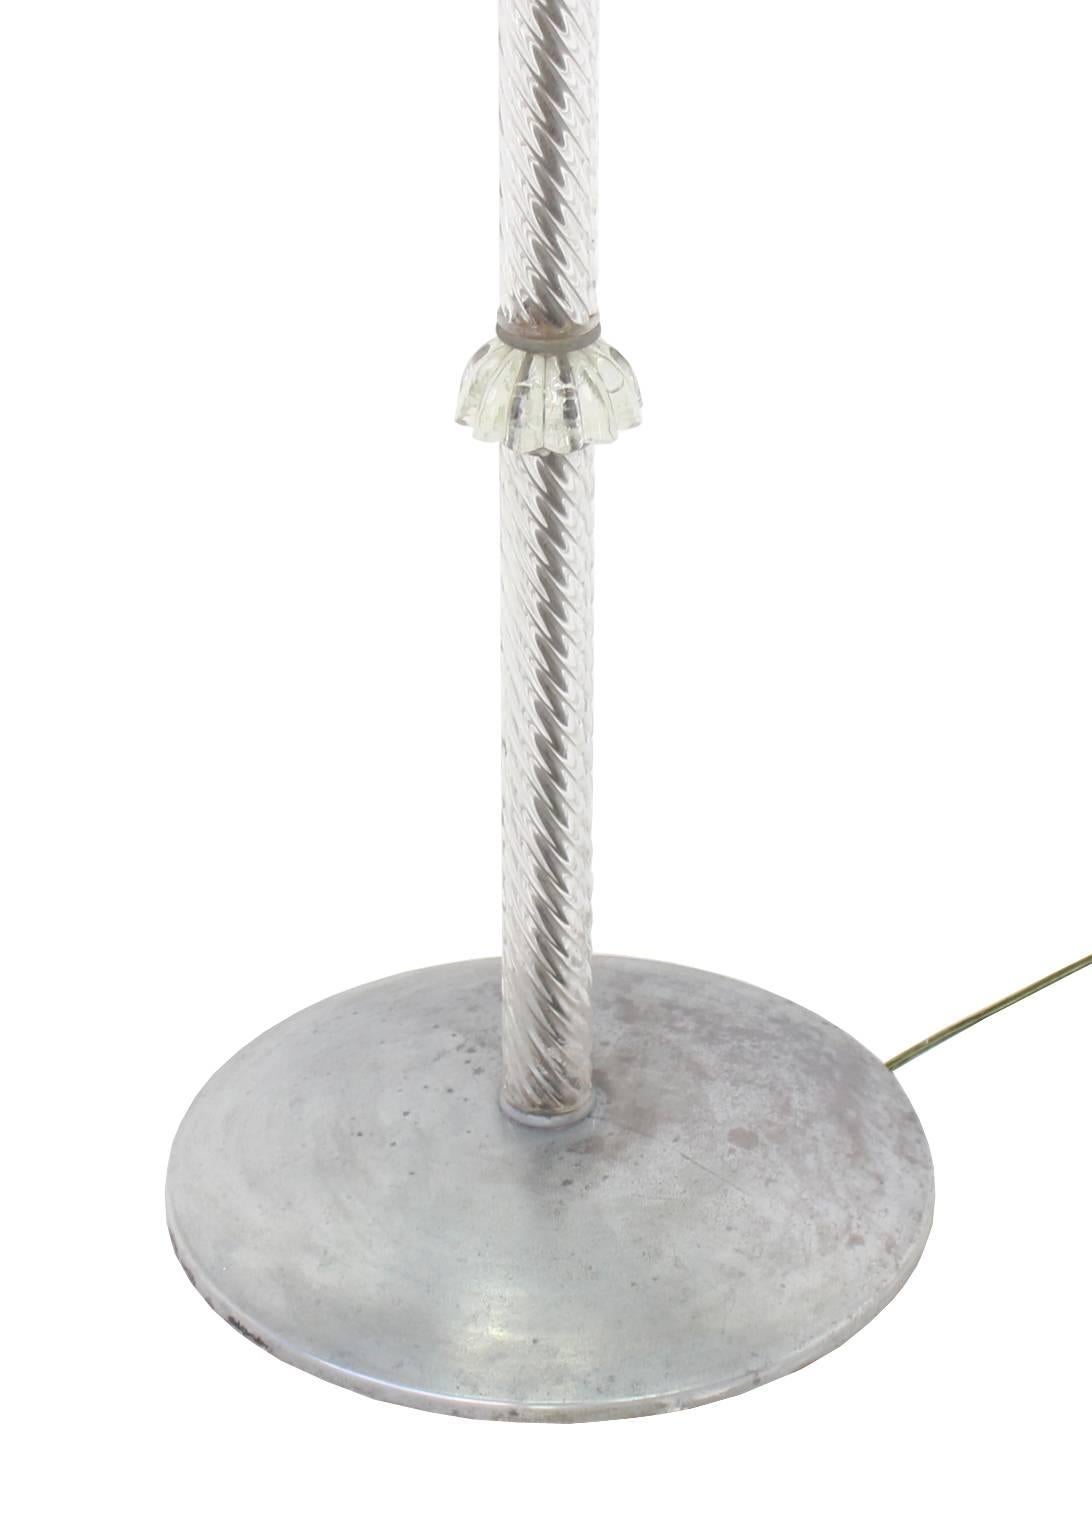 American Twisted Glass Pole Floor Lamp For Sale